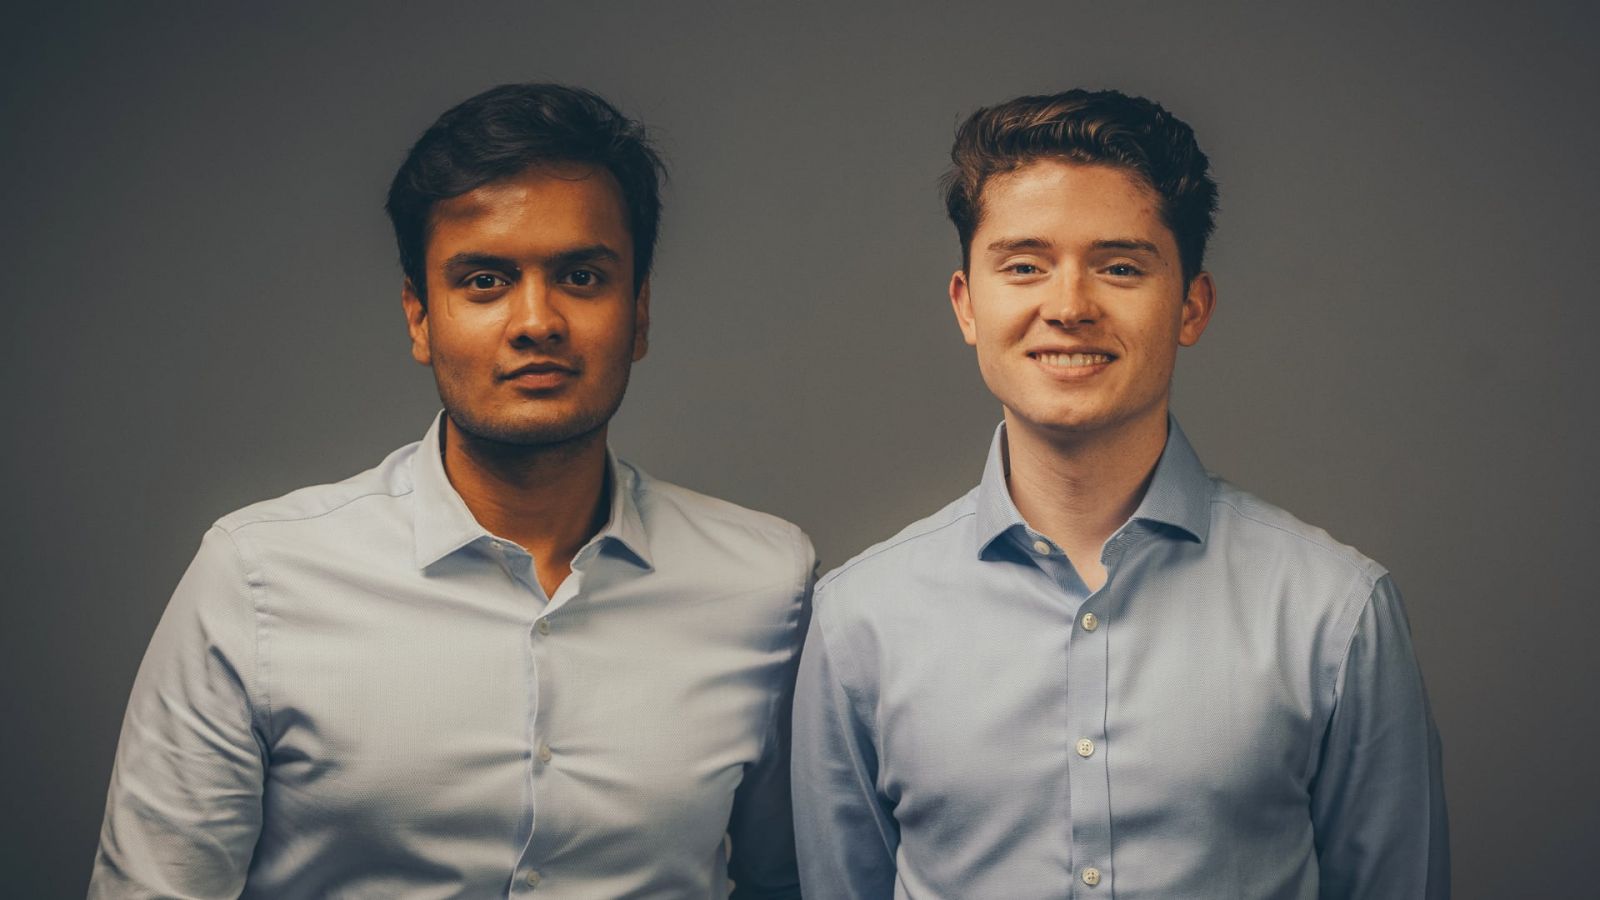 Nishant Jain (left), an electrical engineering technology graduate from the Purdue Polytechnic Institute and Thibault Corens, who earned a double major from the Polytechnic Institute in mechanical engineering technology and manufacturing engineering technology, are co-founders of Presso Inc., a kiosk garment cleaning device that takes only three to seven minutes to clean clothes through a combination of steam, a cleaning liquid and air drying. (Photo provided)